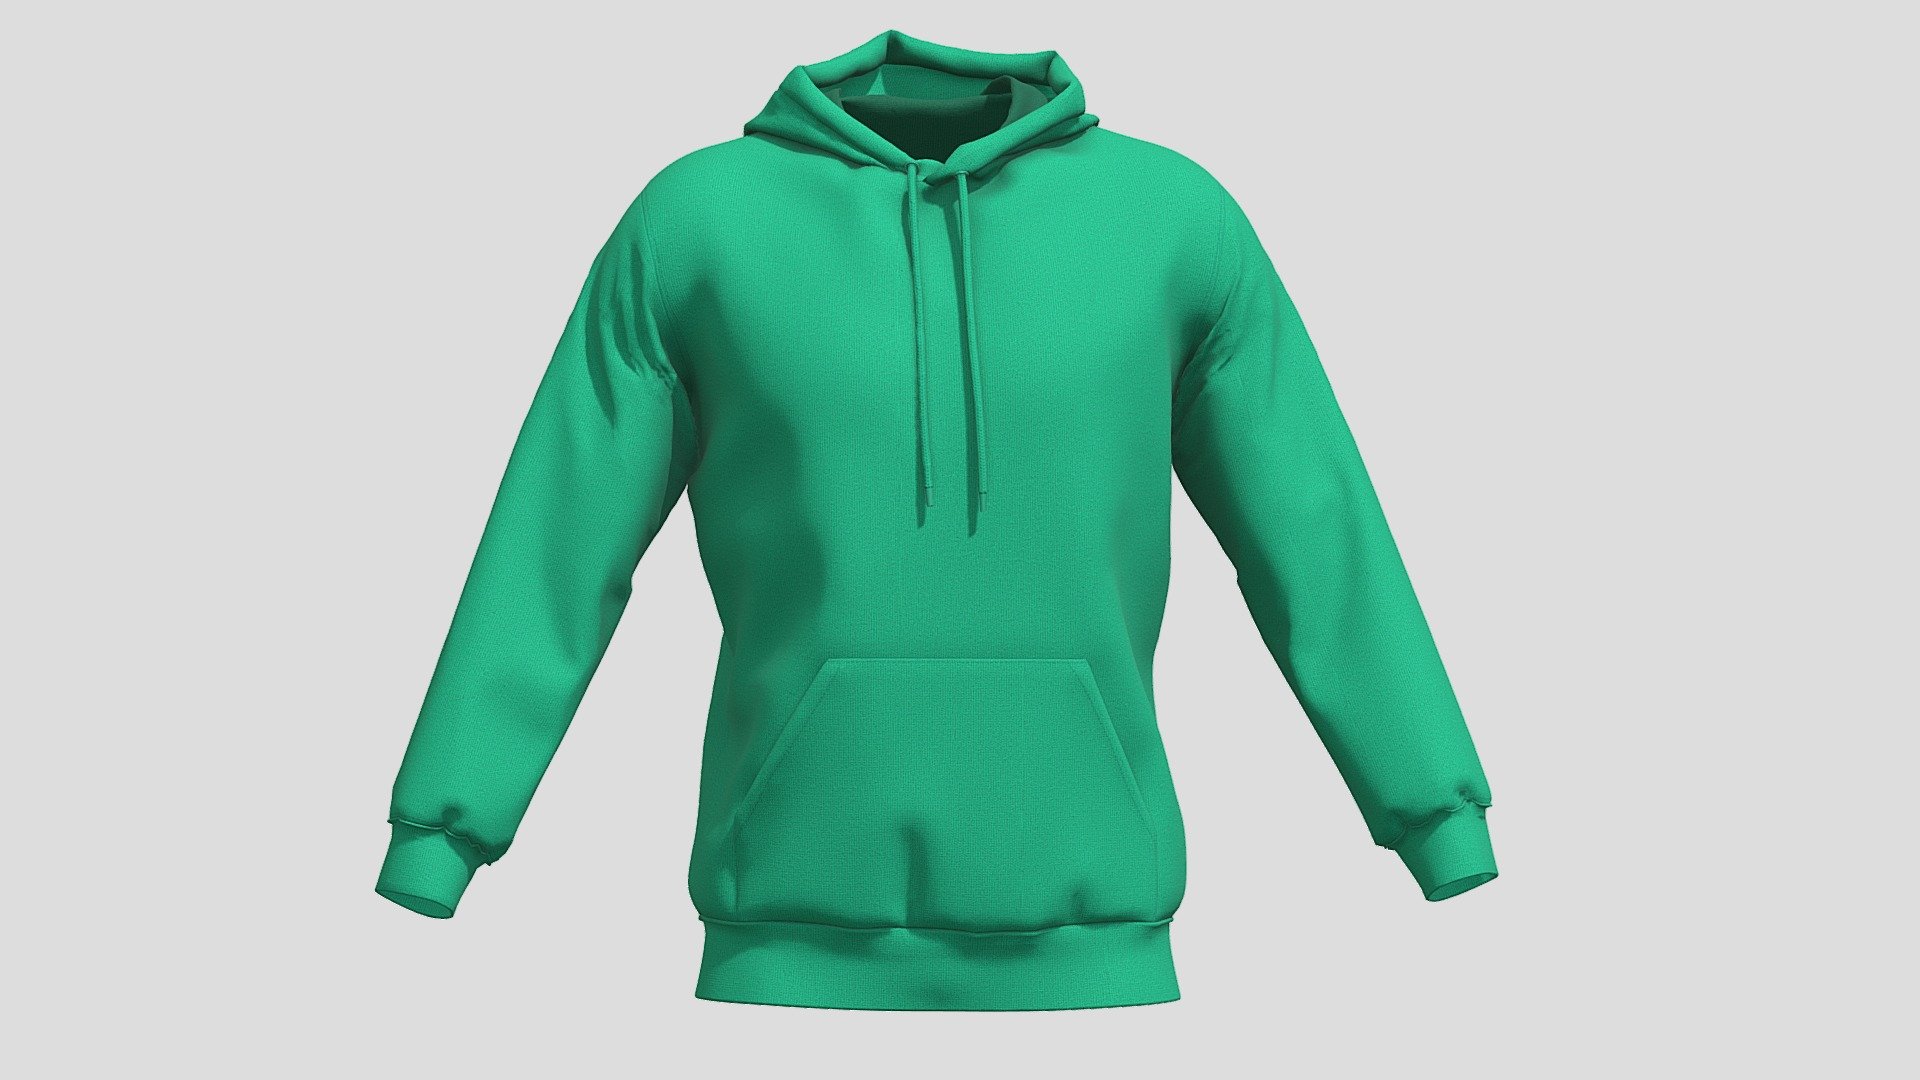 Hi, I'm Frezzy. I am leader of Cgivn studio. We are a team of talented artists working together since 2013.
If you want hire me to do 3d model please touch me at:cgivn.studio Thanks you! - Hoodie Green PBR Realistic - Buy Royalty Free 3D model by Frezzy (@frezzy3d) 3d model